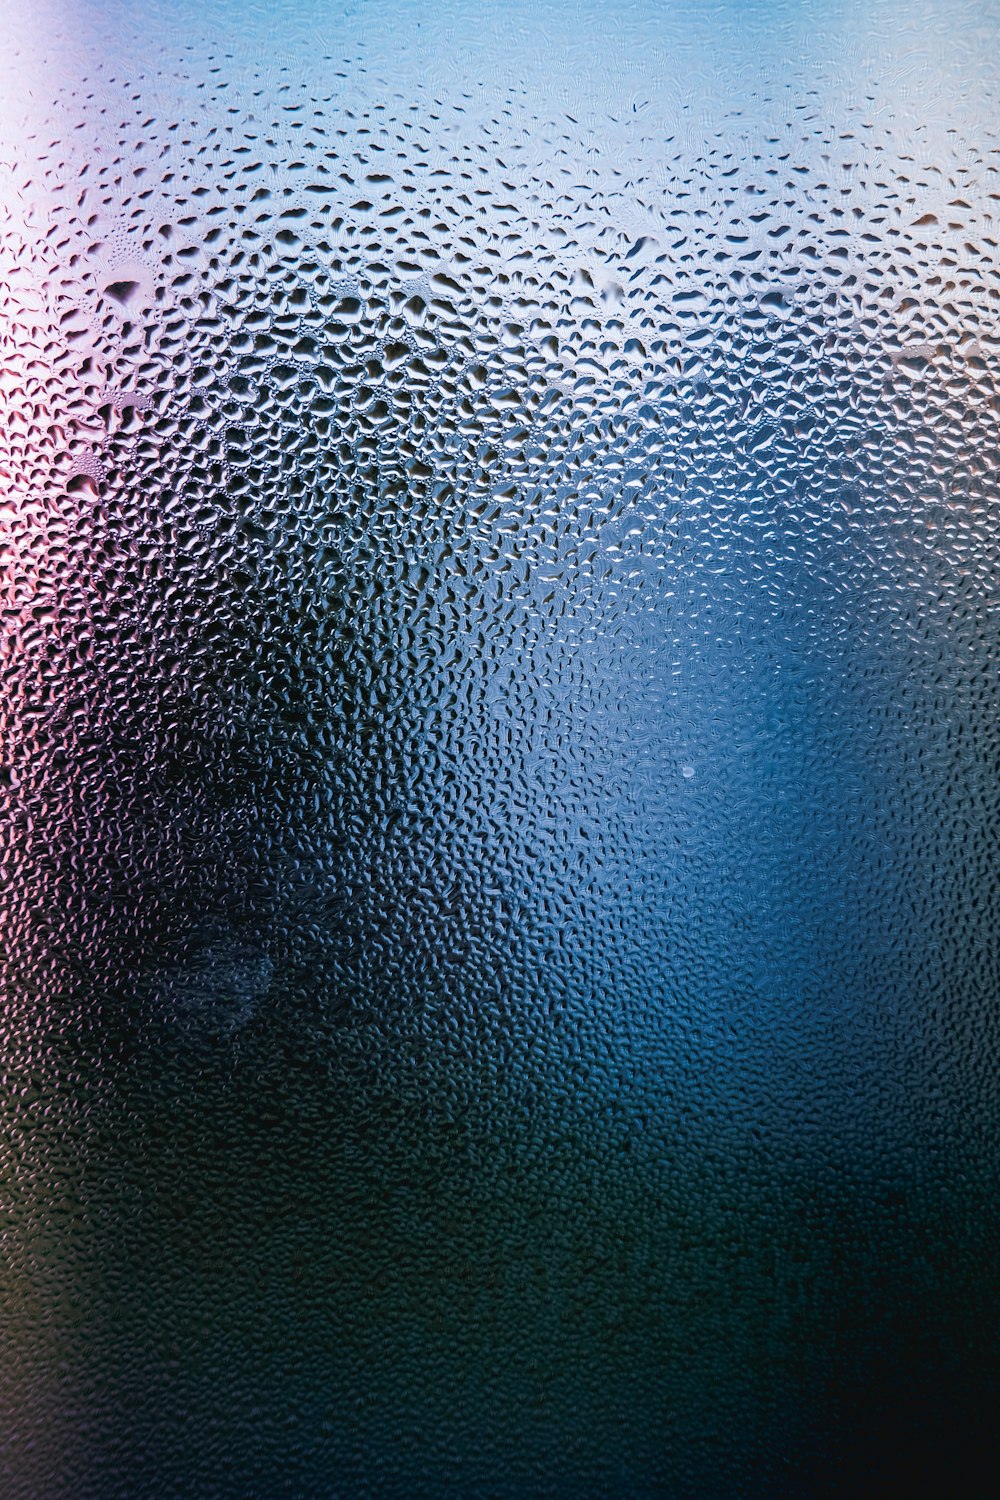 water droplets on black leather